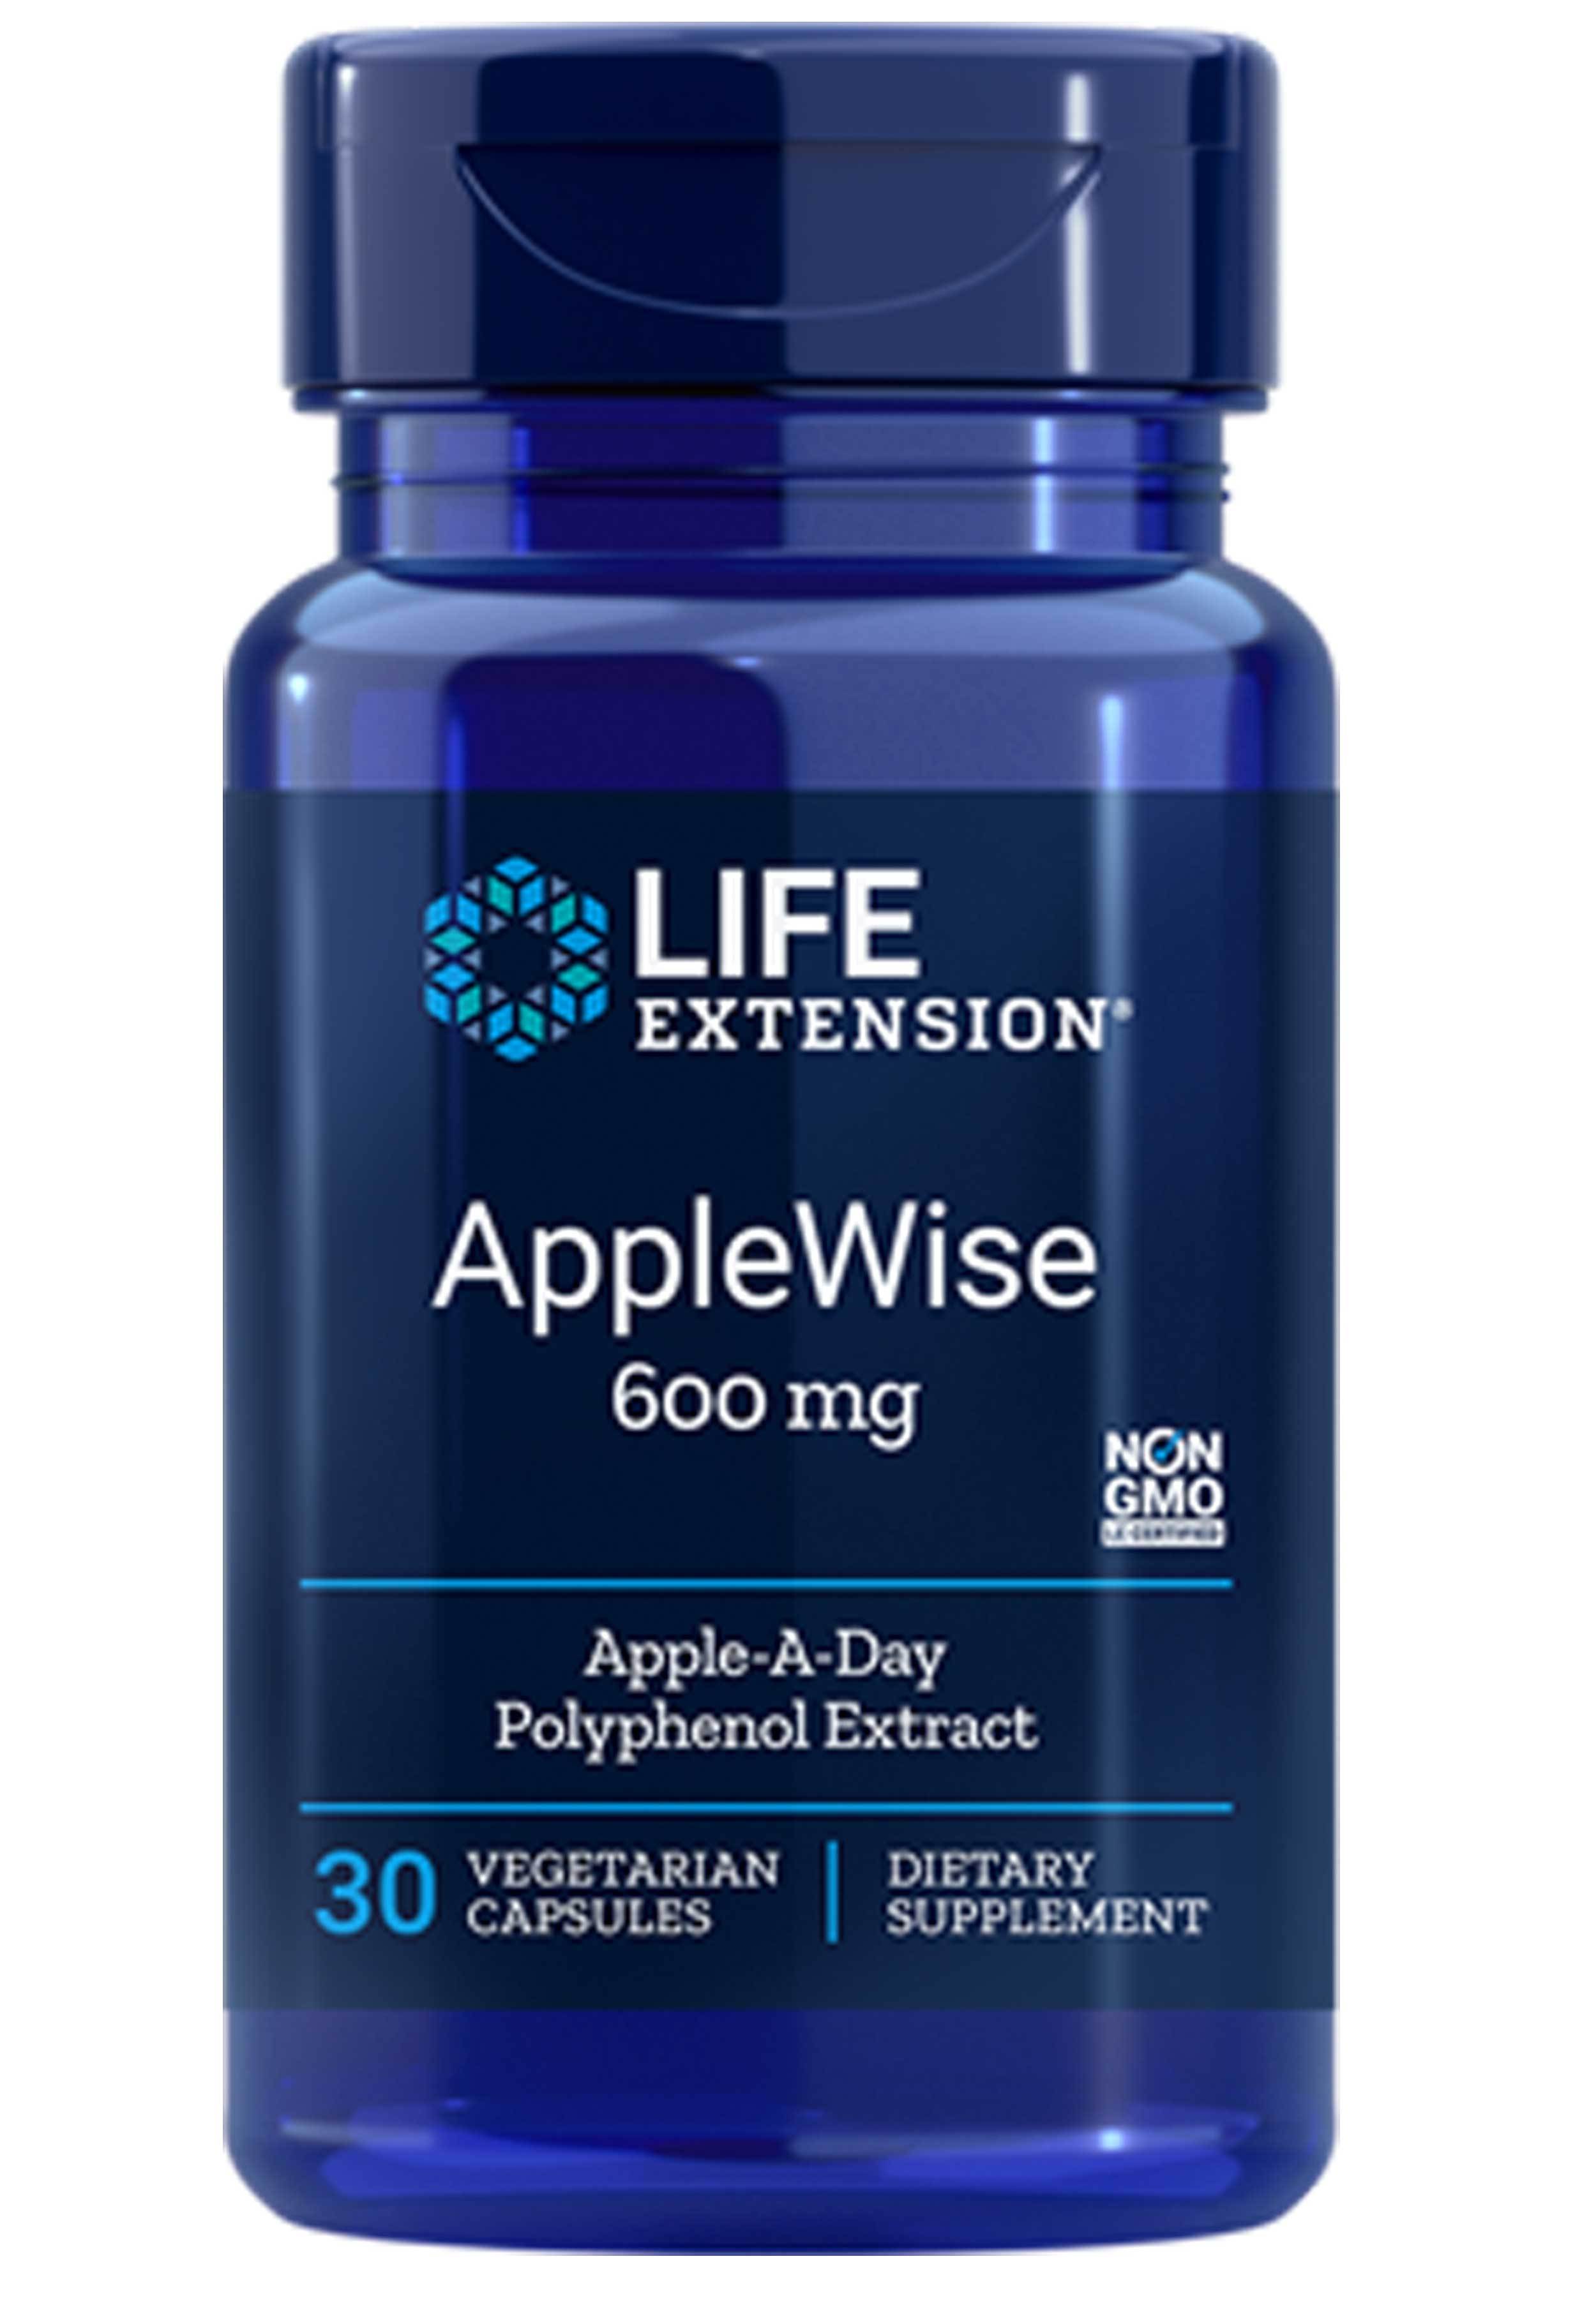 Life Extension AppleWise